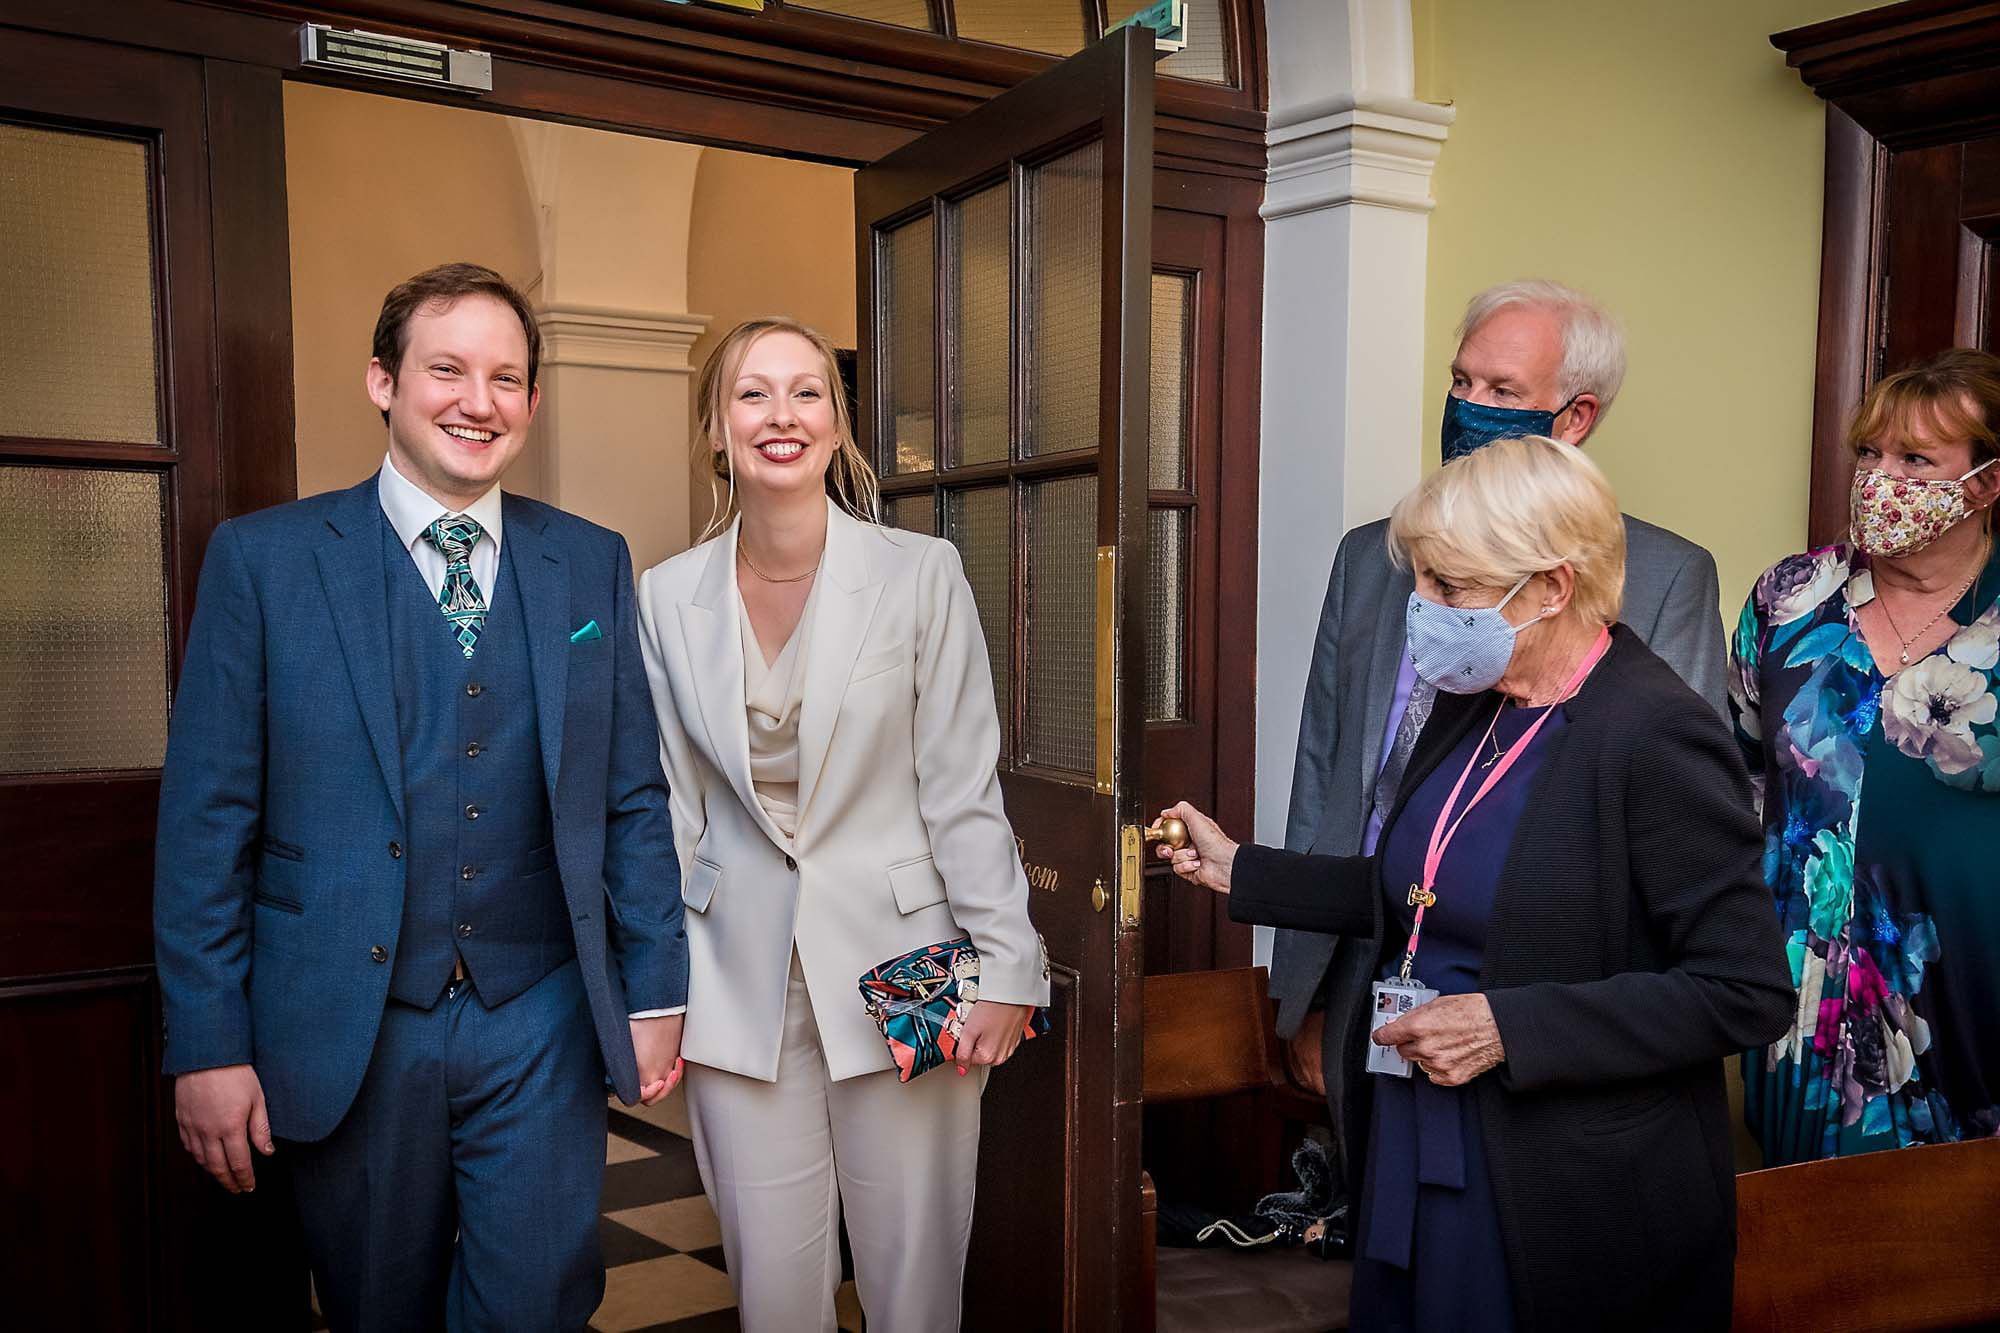 Smiling couple enter the Rossetti Room at Chelsea Old Town Hall with masked guests watching during Coronavirus pandemic